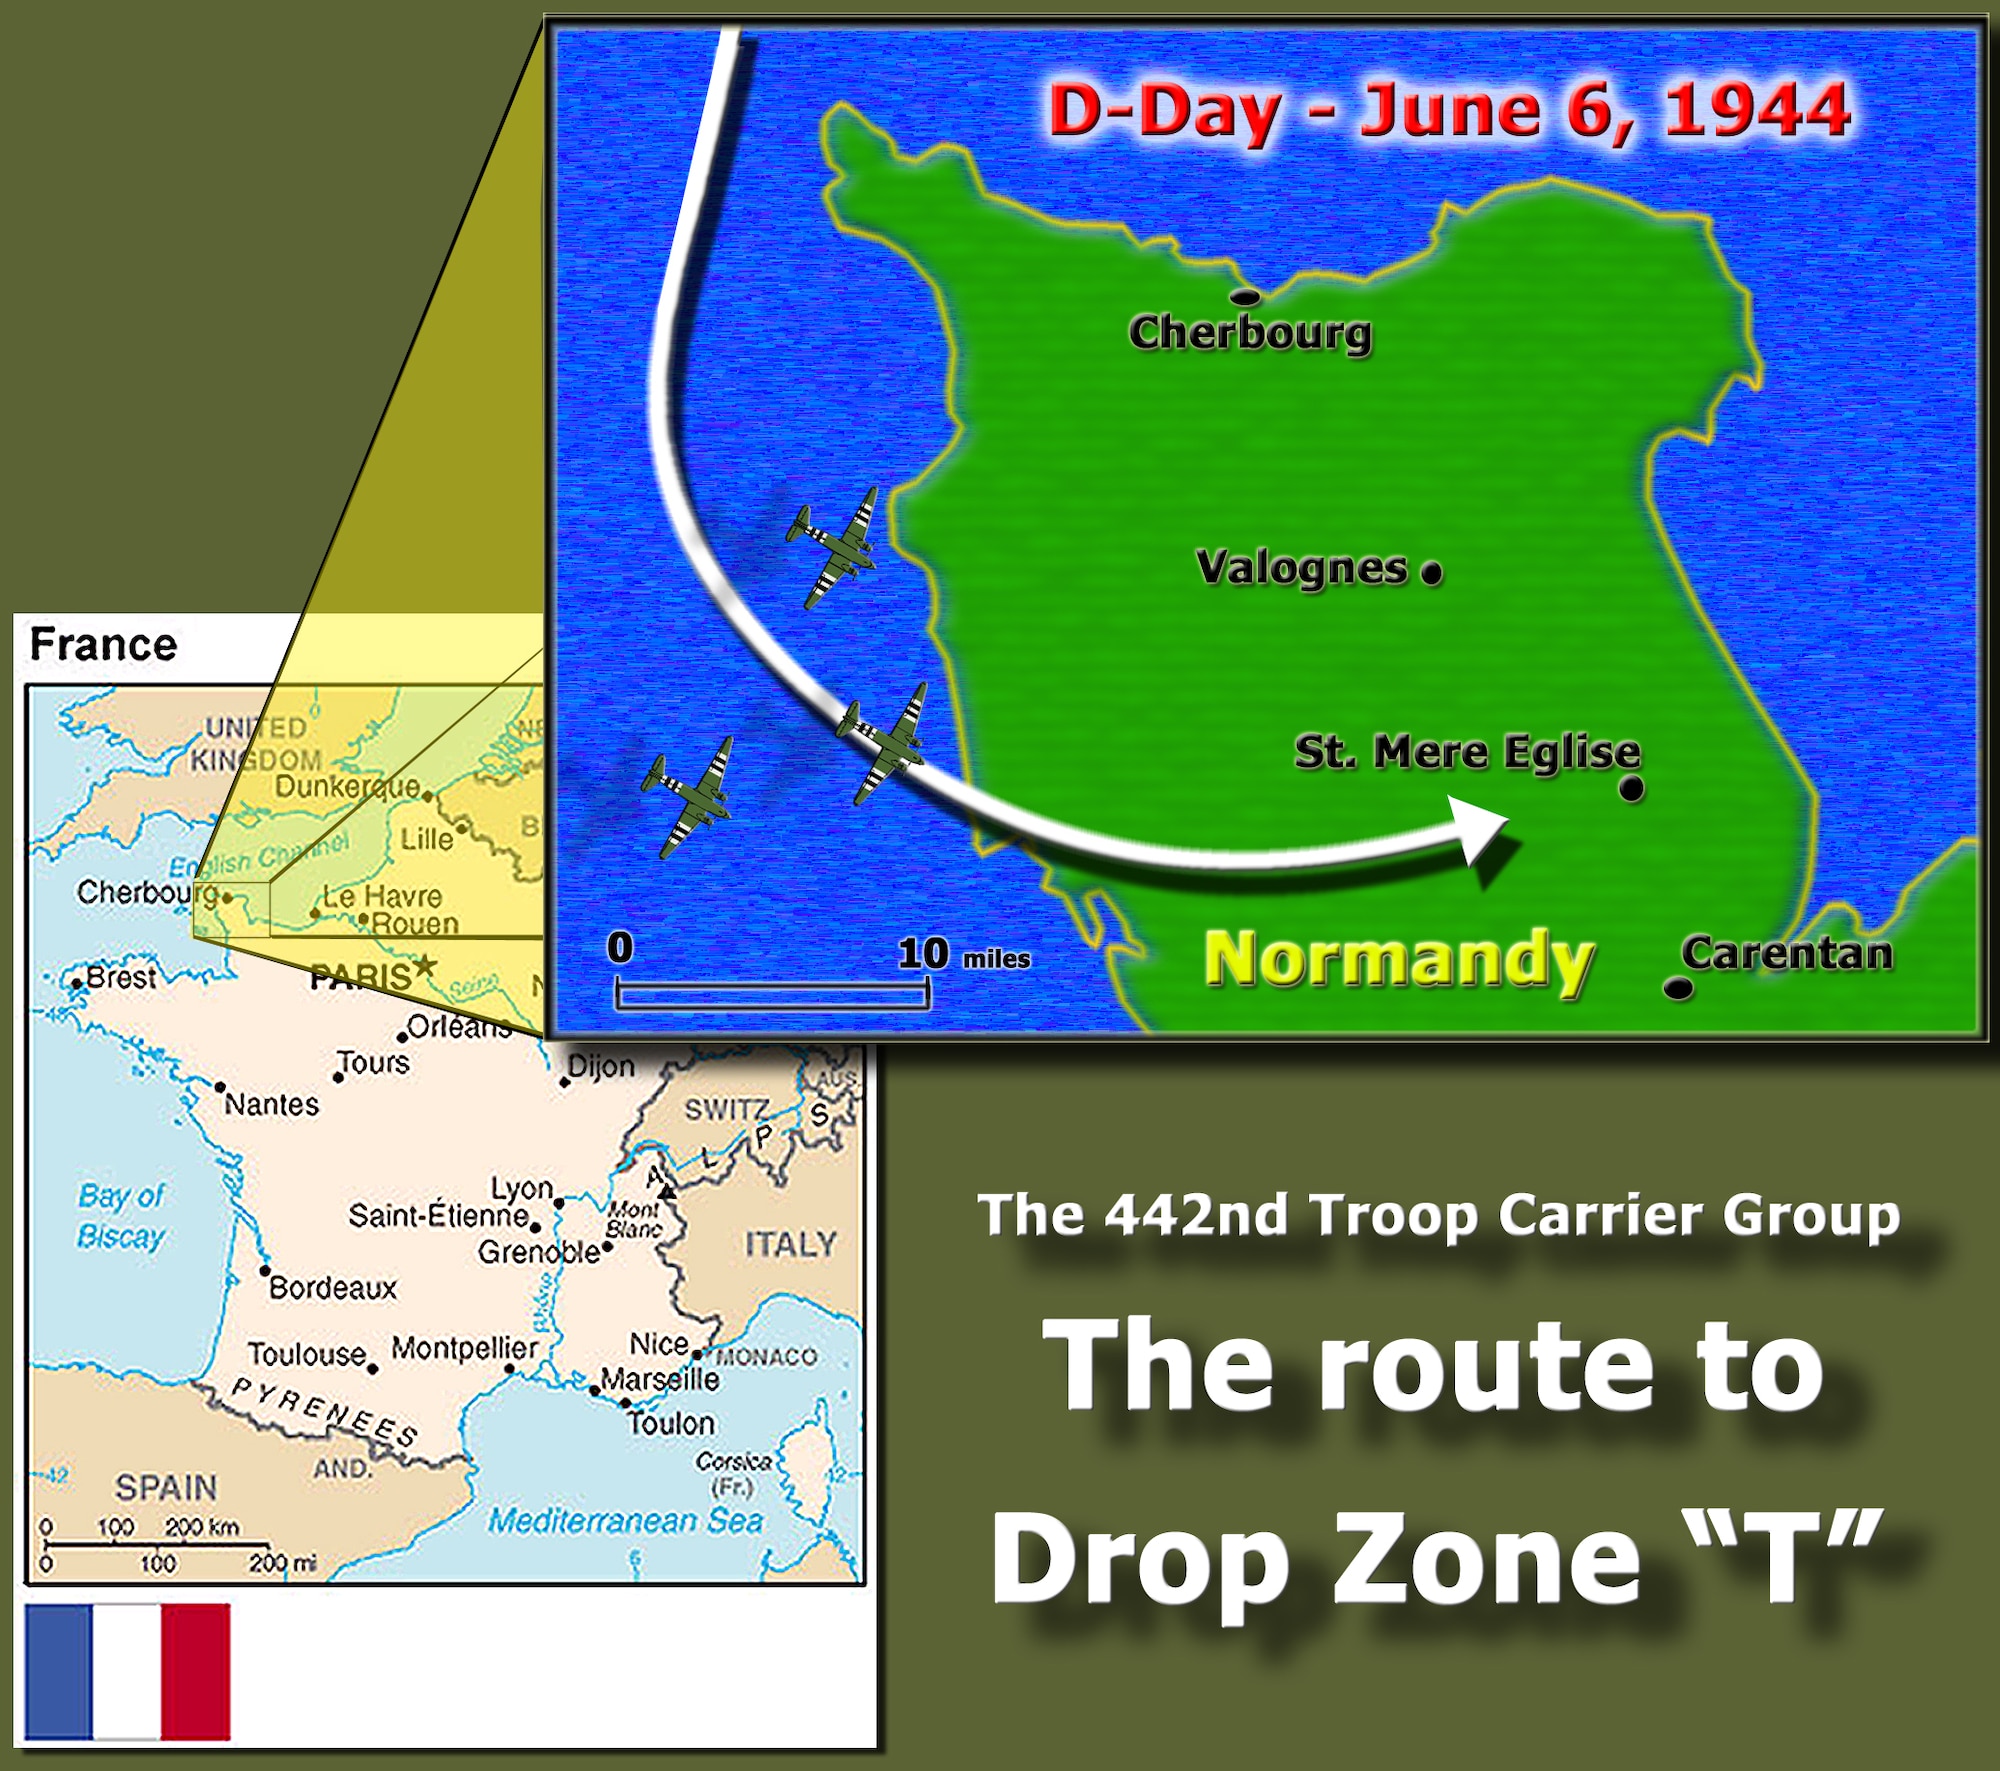 The route the 442nd Troop Carrier Group traversed into Normandy, France, during the early morning hours of June 6, 1944 took them west of the Cherbourg peninsula and over the Channel Islands to approach their designated drop zone near St. Mere Eglise. Aboard the 442nd's 45 C-47 Skytrain aircraft were paratroopers from the 82nd Airborne. The 442nd TCG was the World War II predecessor of the 442nd Fighter Wing. (Graphic by Master Sgt. Bill Huntington)
